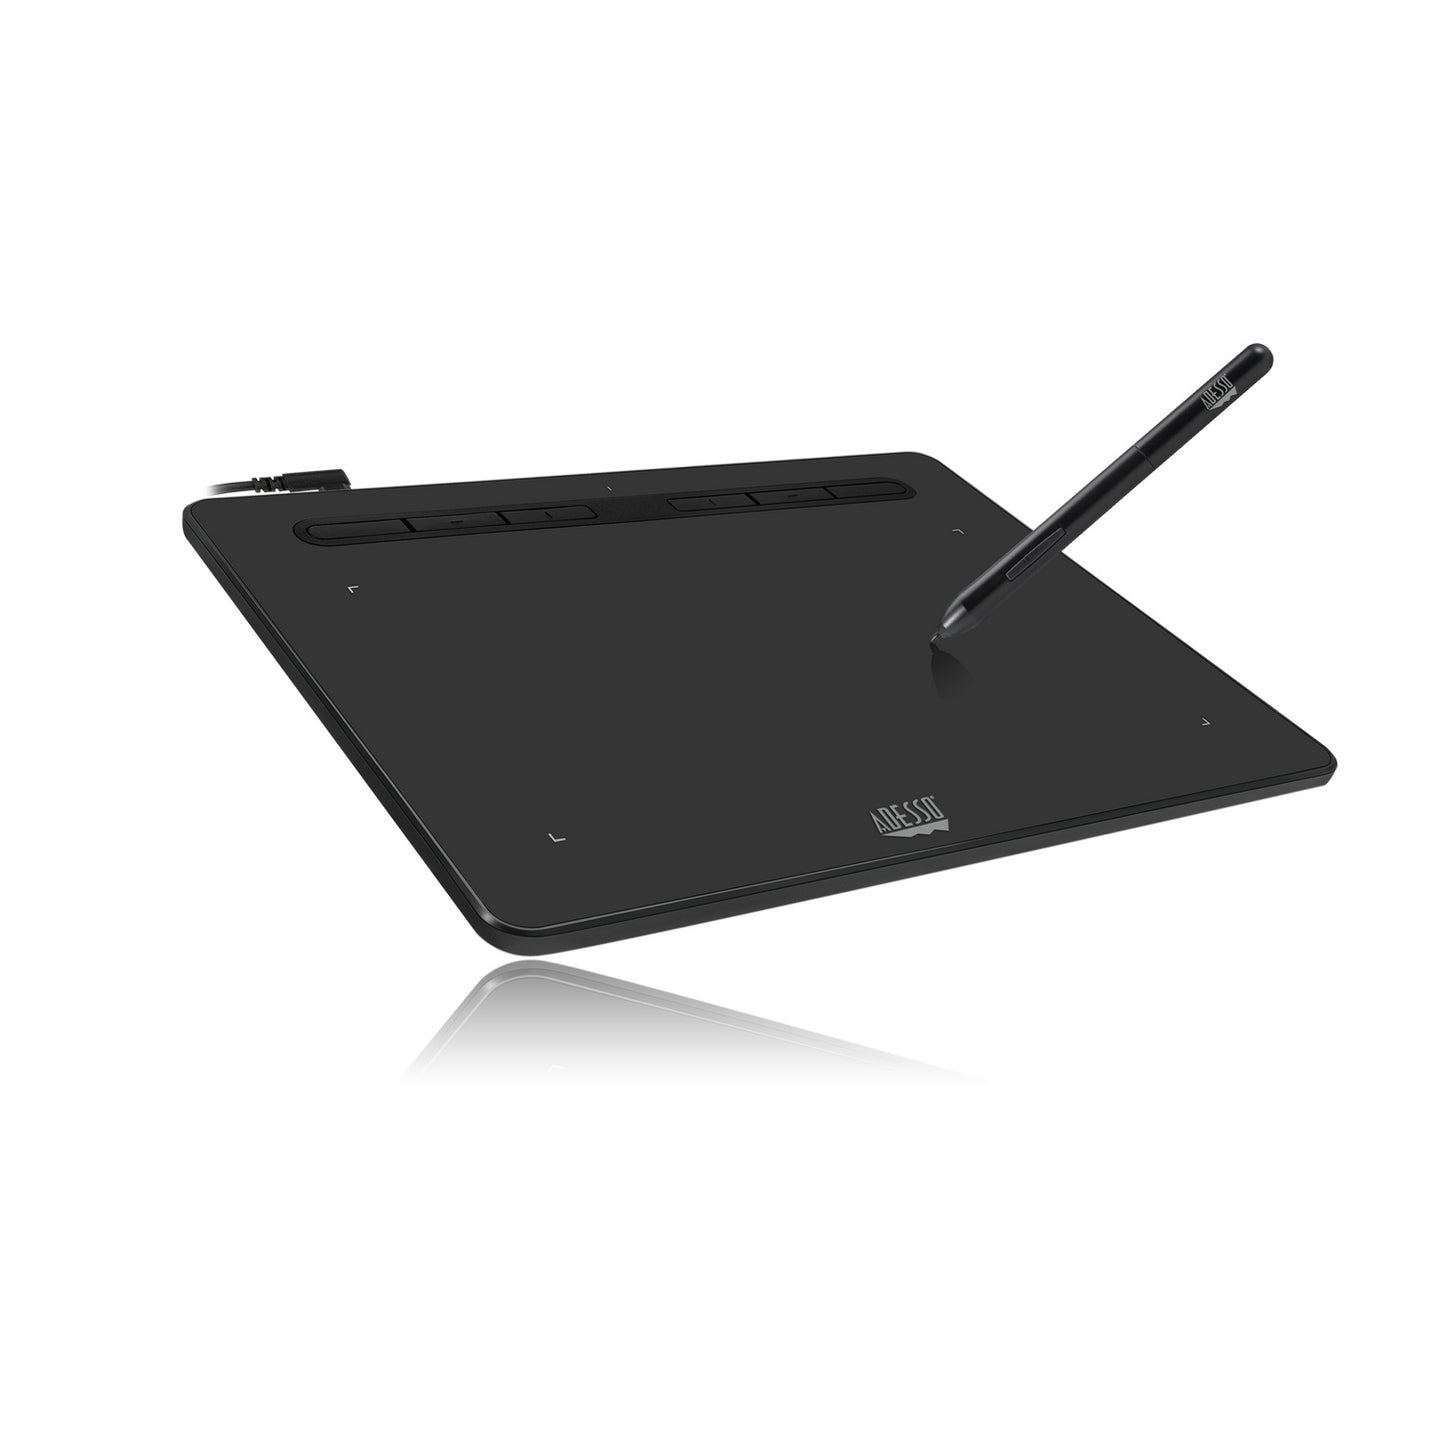 Adesso Cybertablet K8 8" x 5" Graphic Tablet